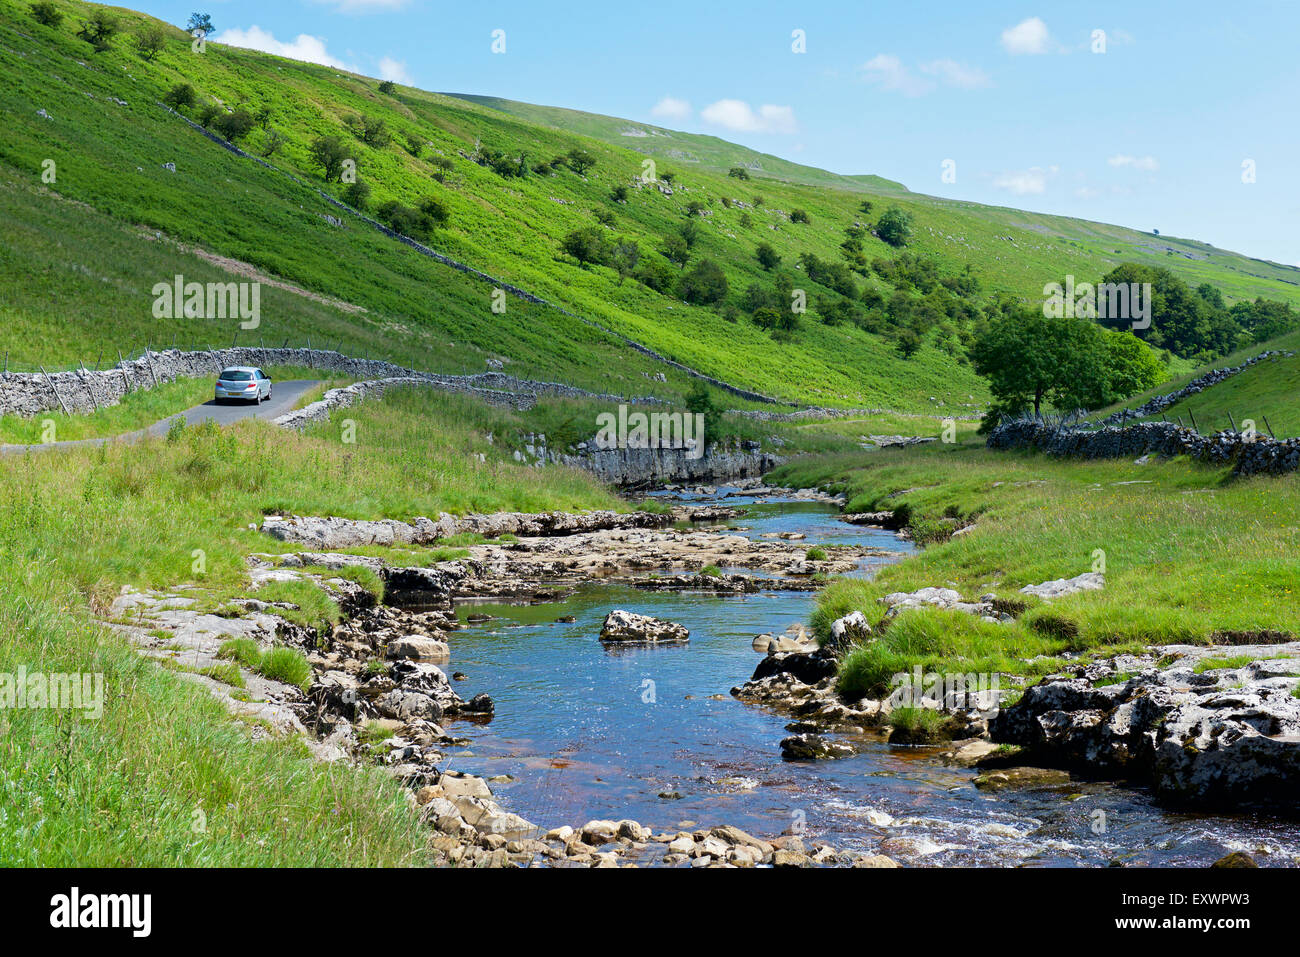 River Wharfe and car on B6160 road in Langstrothdale, Wharfedale, Yorkshire Dales National Park, North Yorkshire, England UK Stock Photo